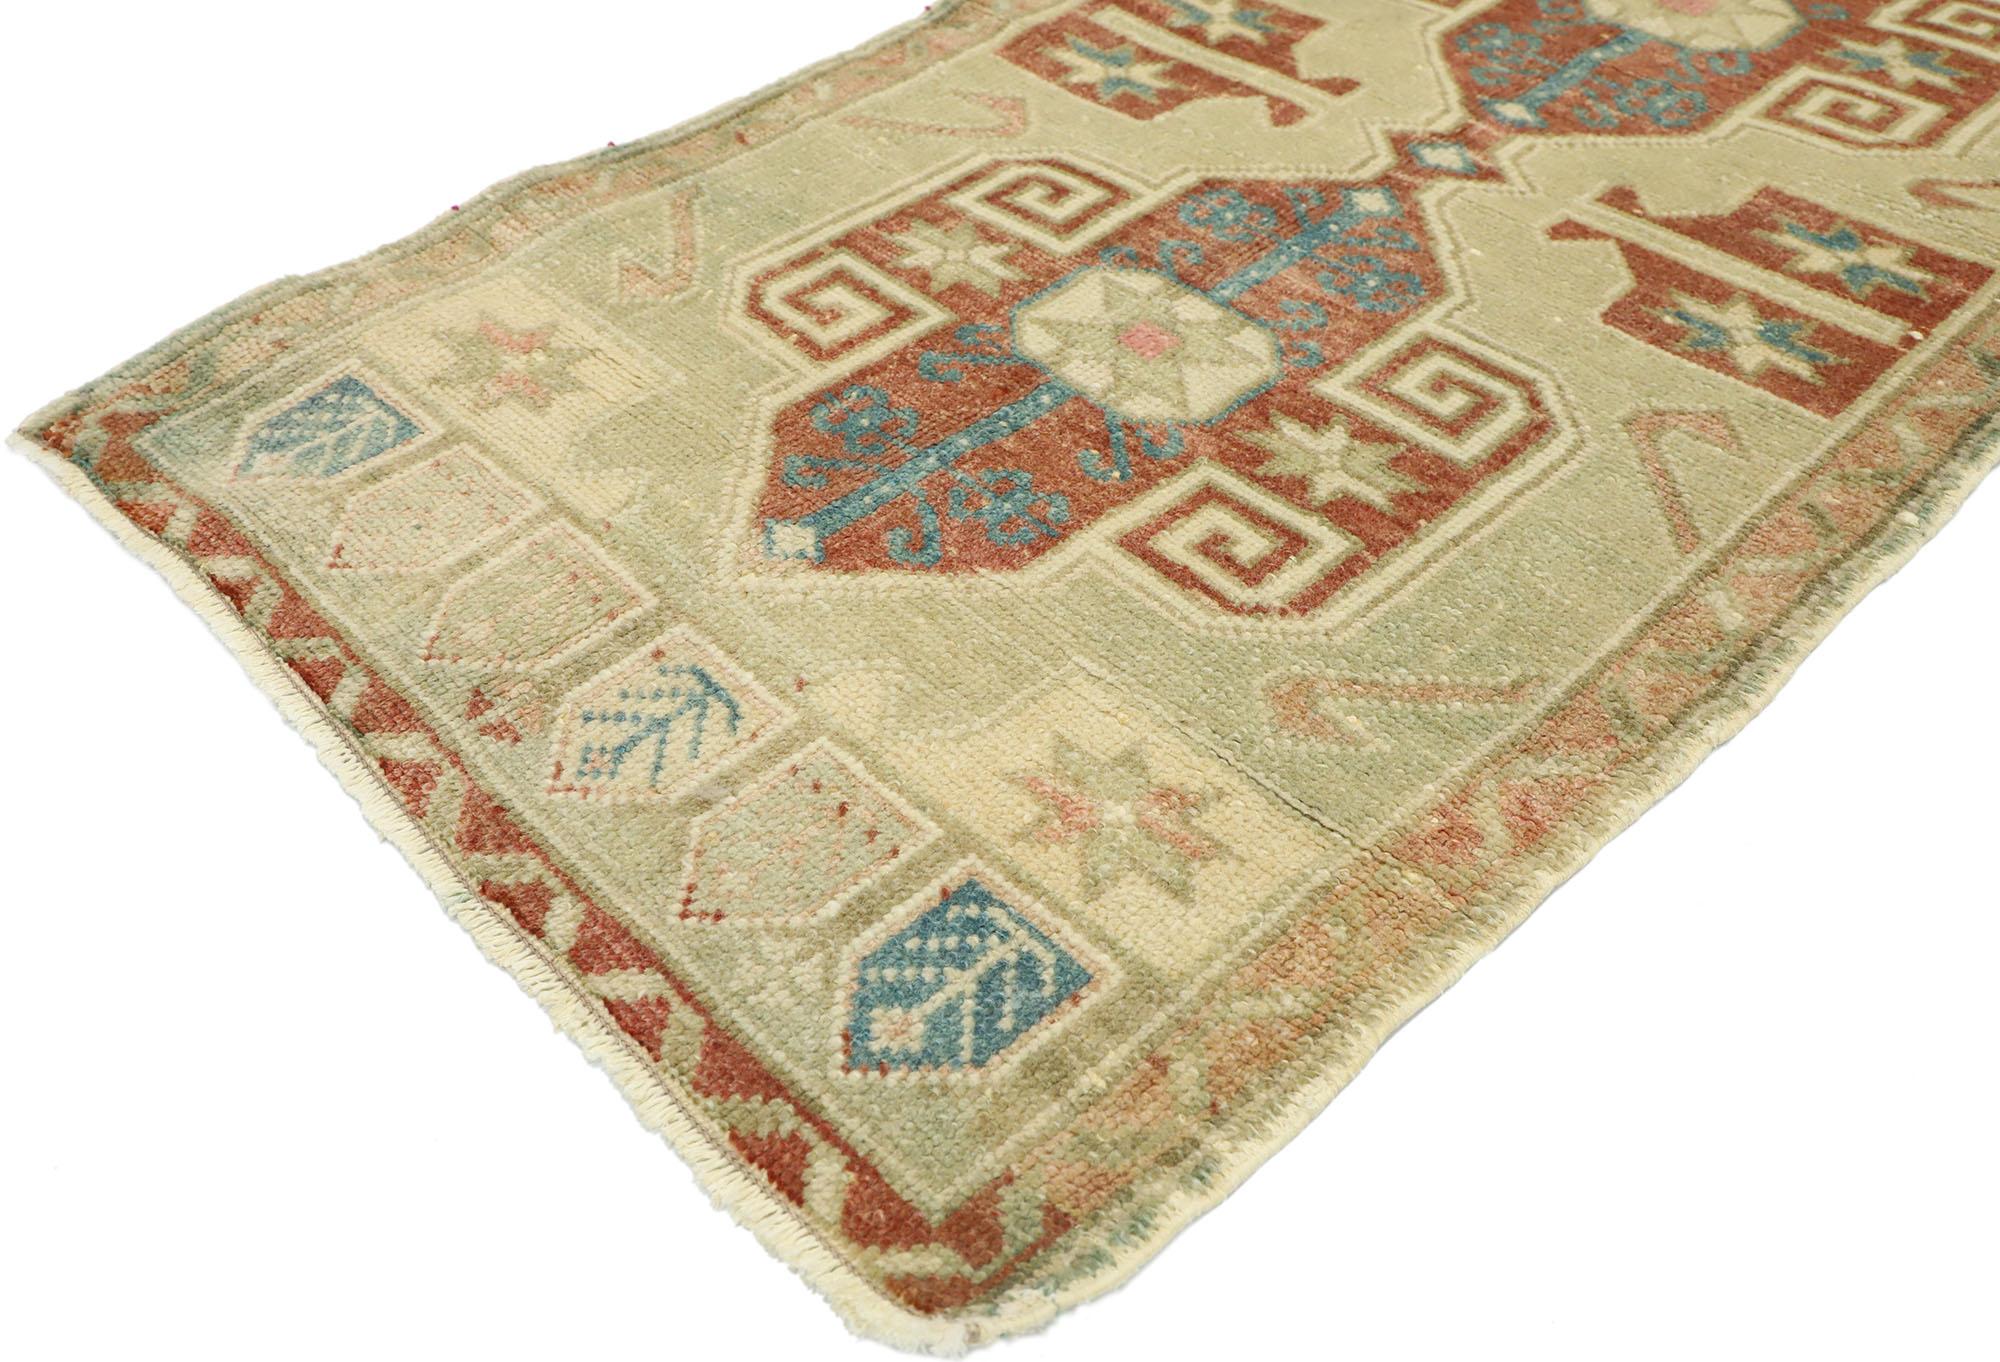 52696 vintage Turkish Oushak Yastik scatter rug, small accent rug. This hand knotted wool vintage features two central medallions patterned with ram's Horn, hands on hips, eight-point stars, and latch-hooks on an abrashed open field. It is enclosed